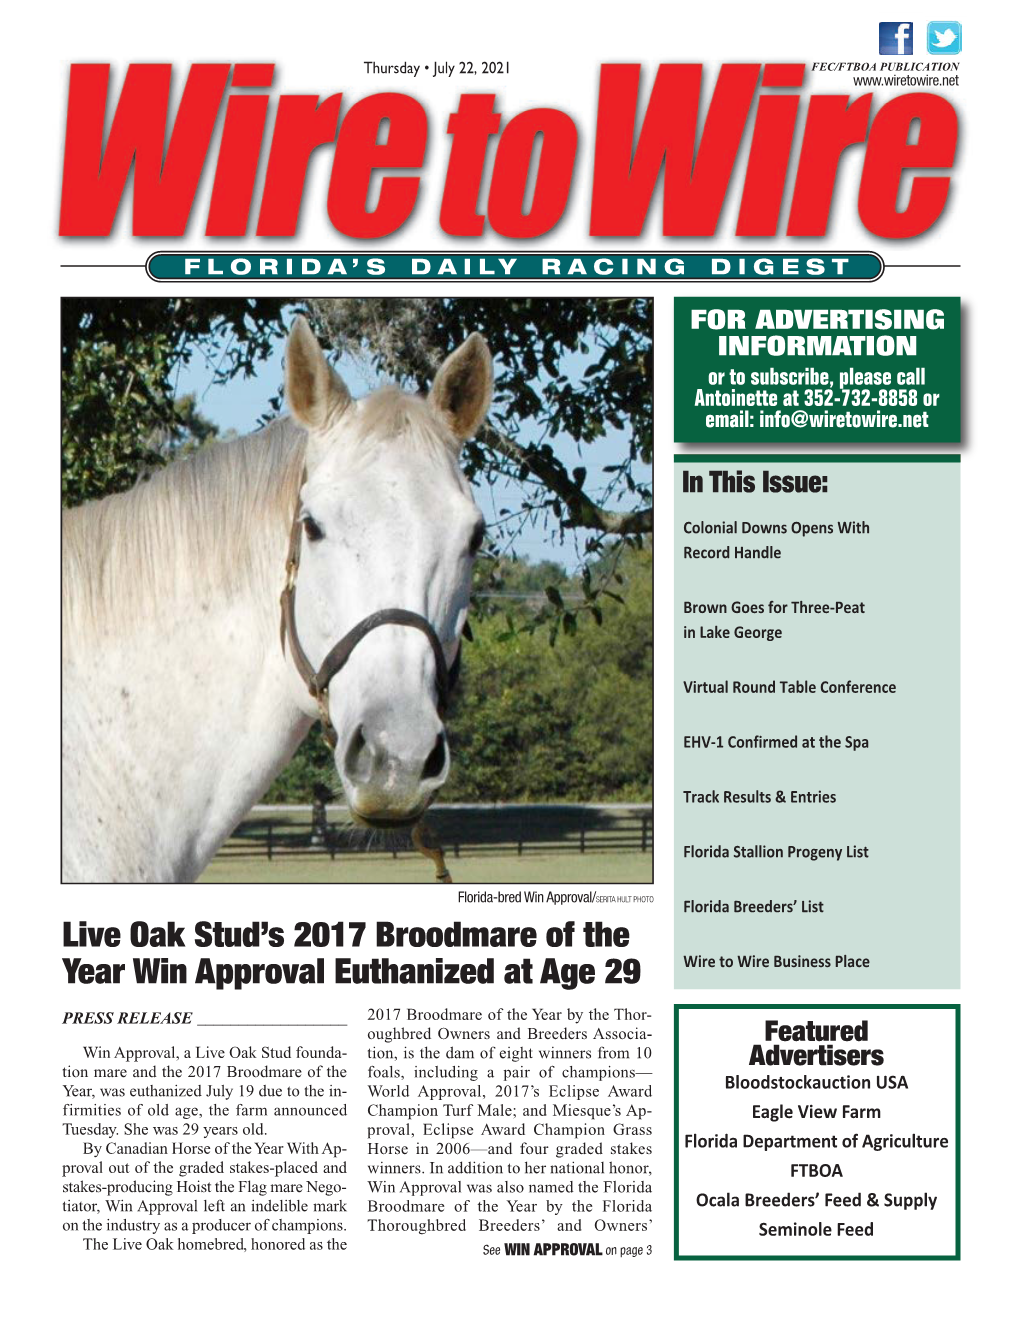 Live Oak Stud's 2017 Broodmare of the Year Win Approval Euthanized at Age 29